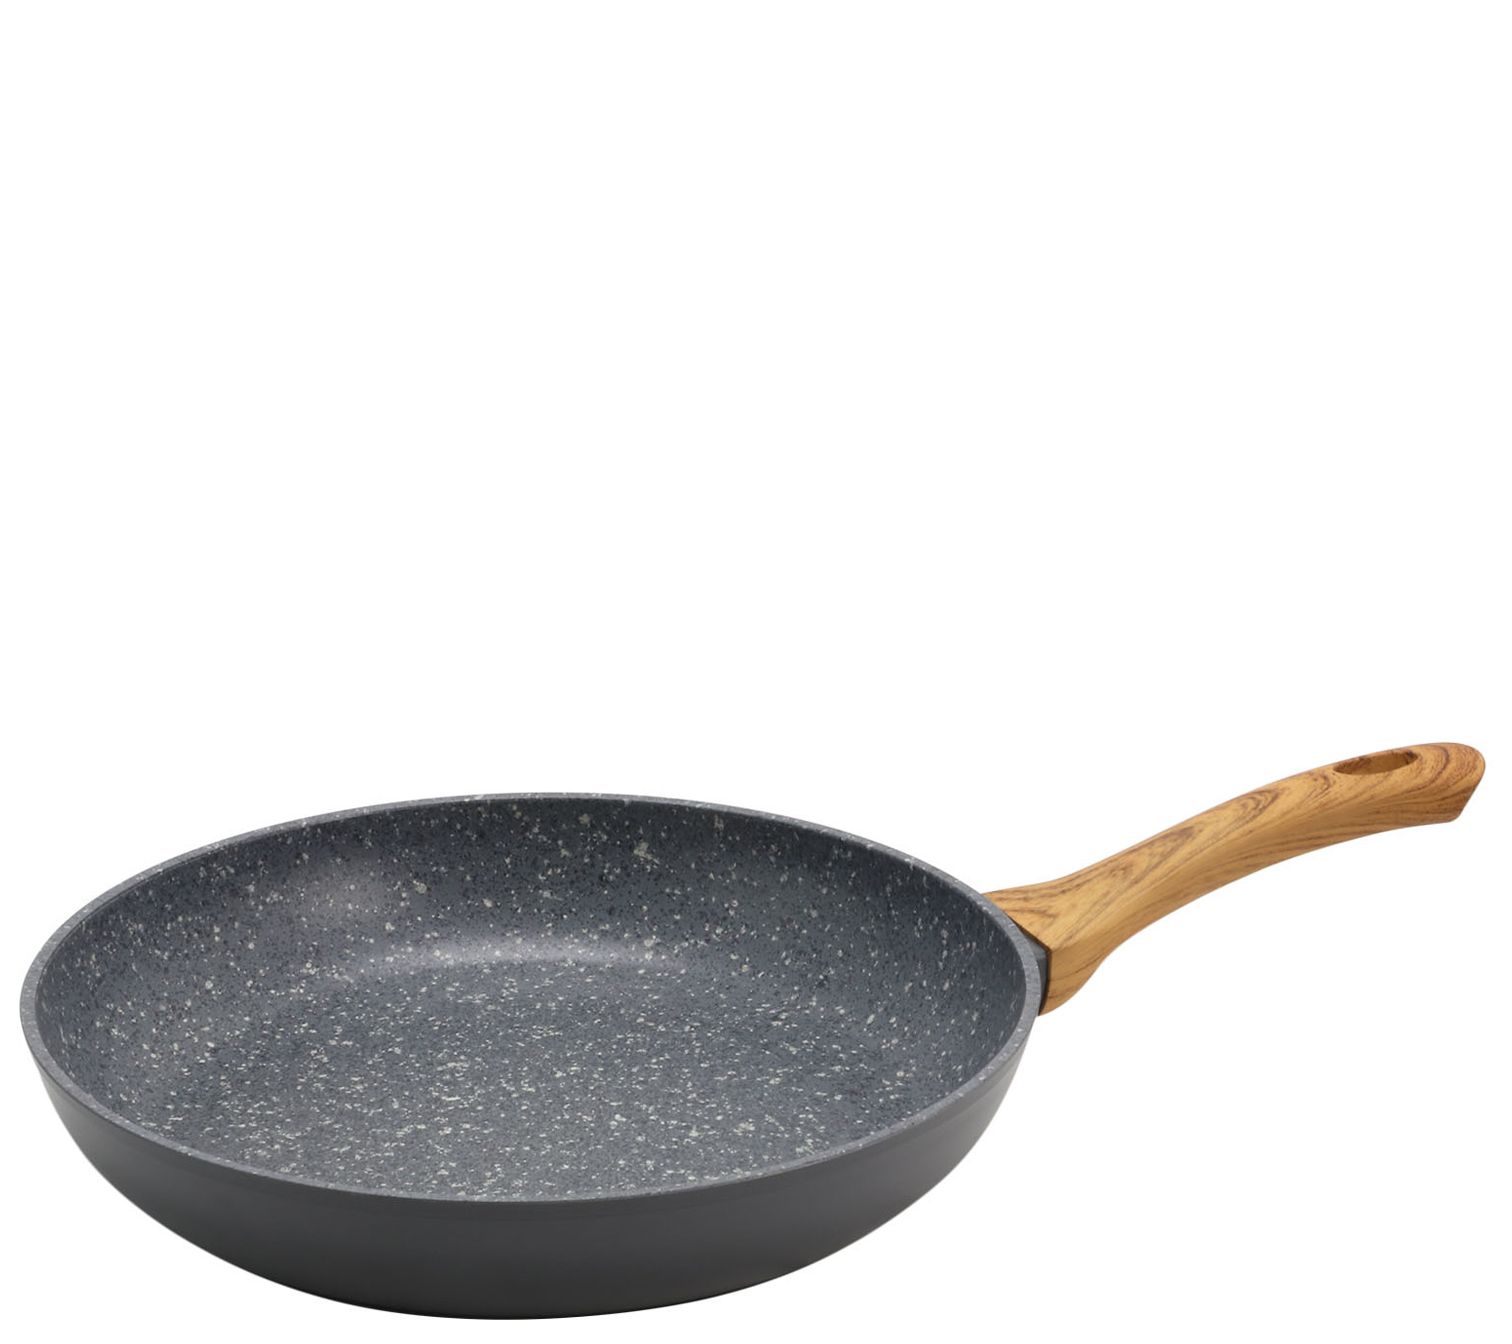 Oster Legacy 12 Inch Aluminum Nonstick Stovetop Frying Pan In Gray